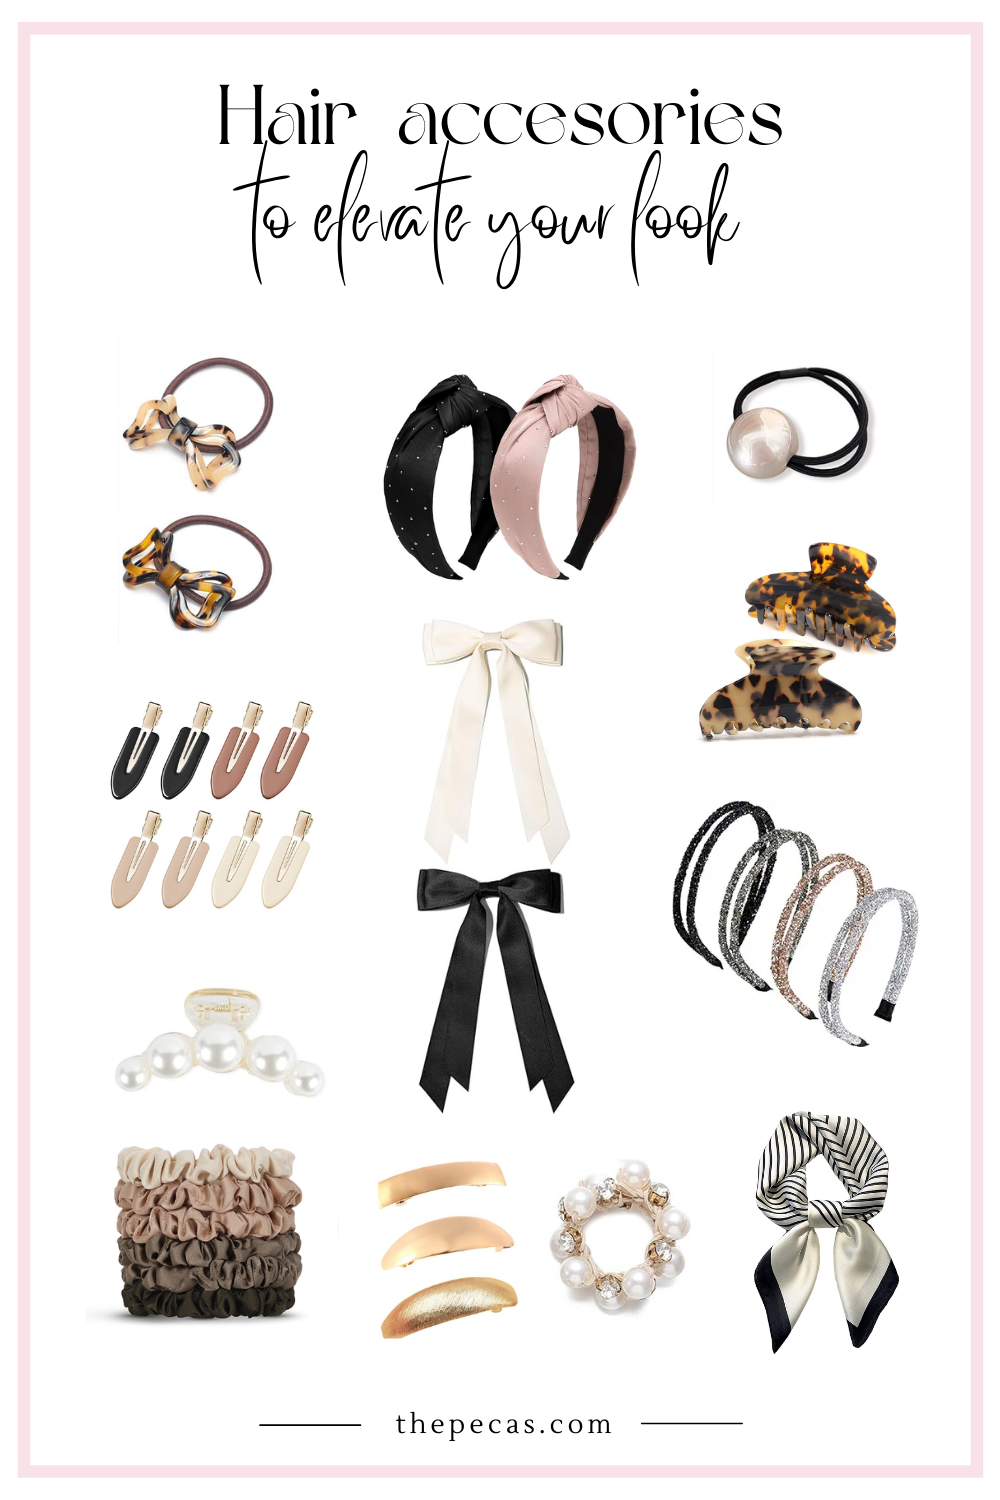 Hair accesories to elevate your look